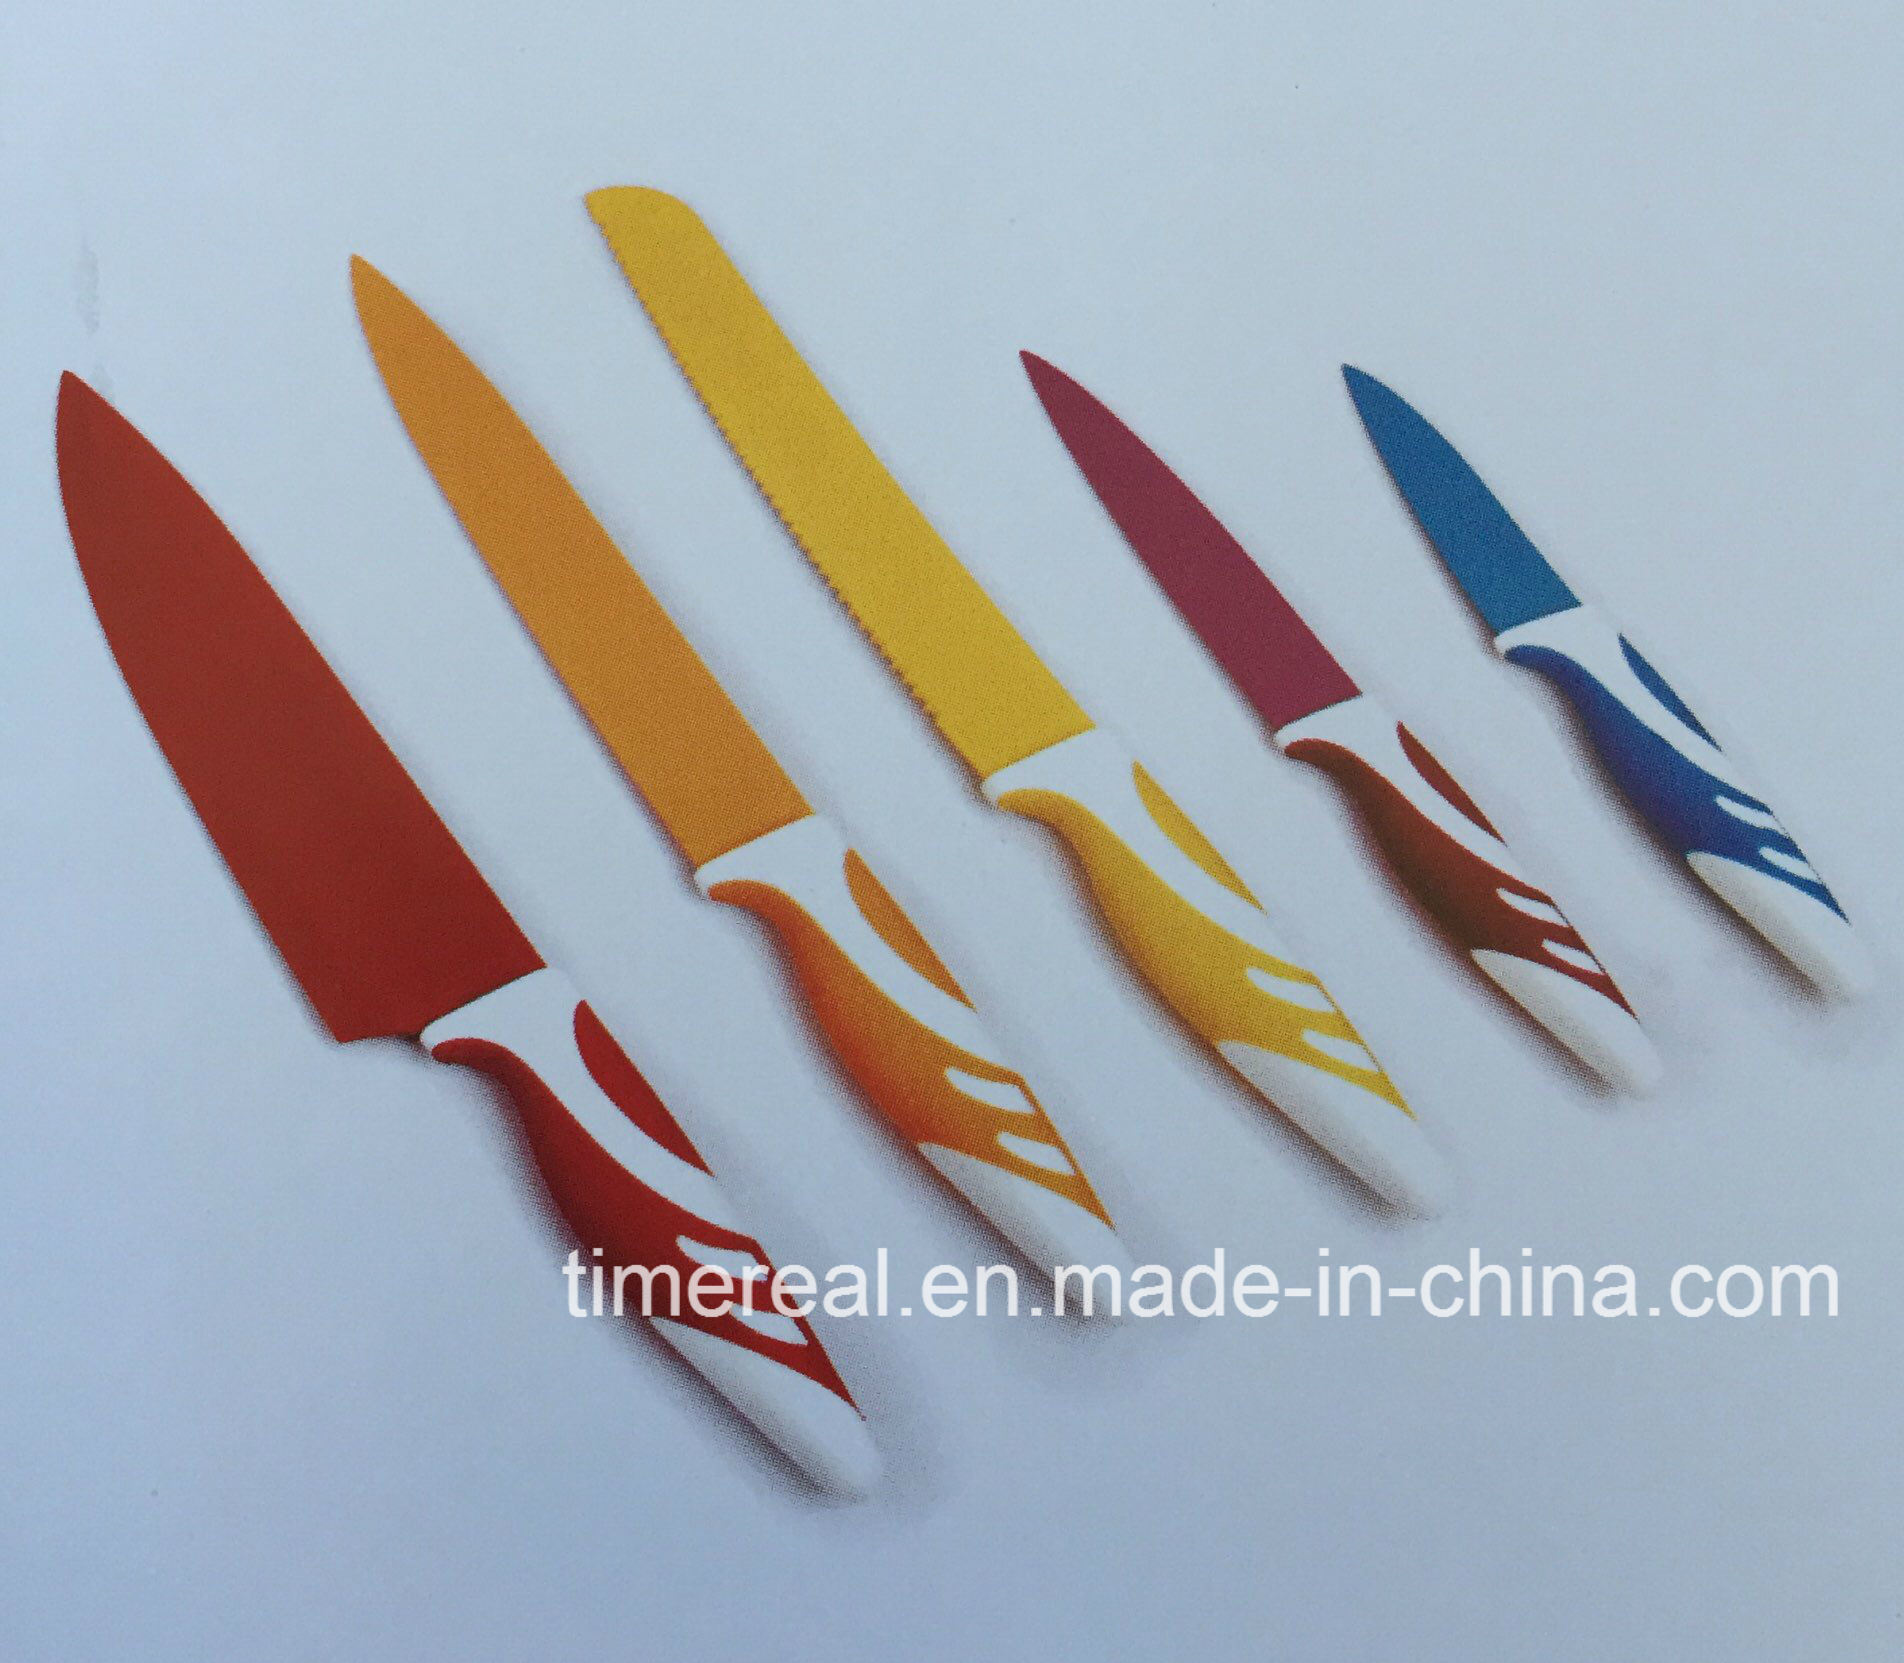 Stainless Steel Kitchen Knives Set with Painting No. Fj-0026